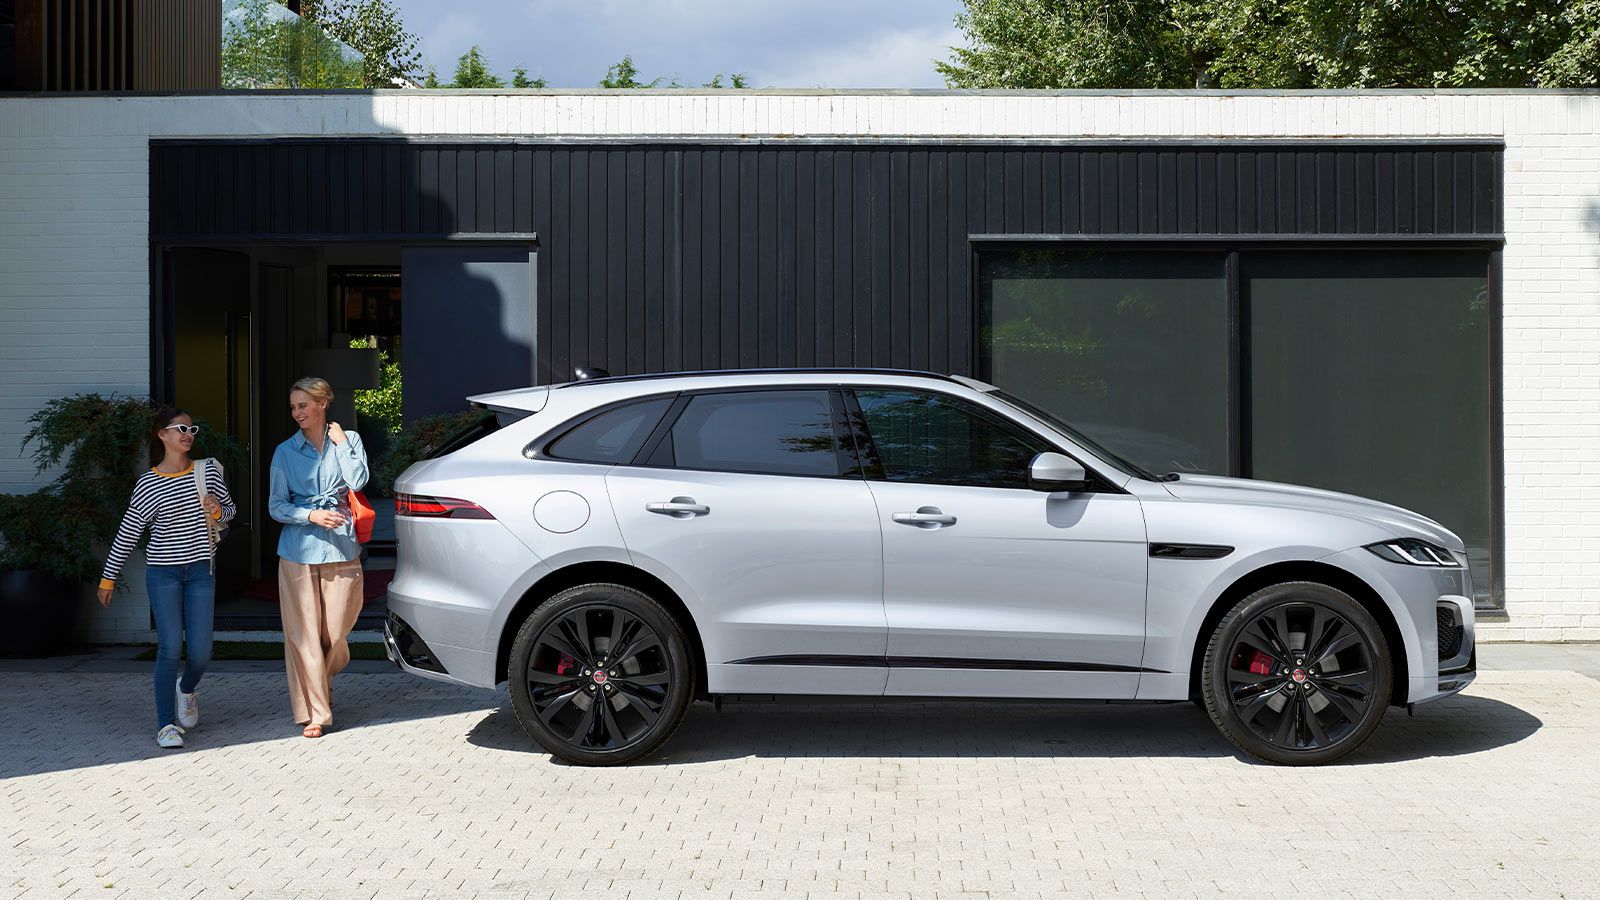 Side view of white Jaguar F Pace on driveway